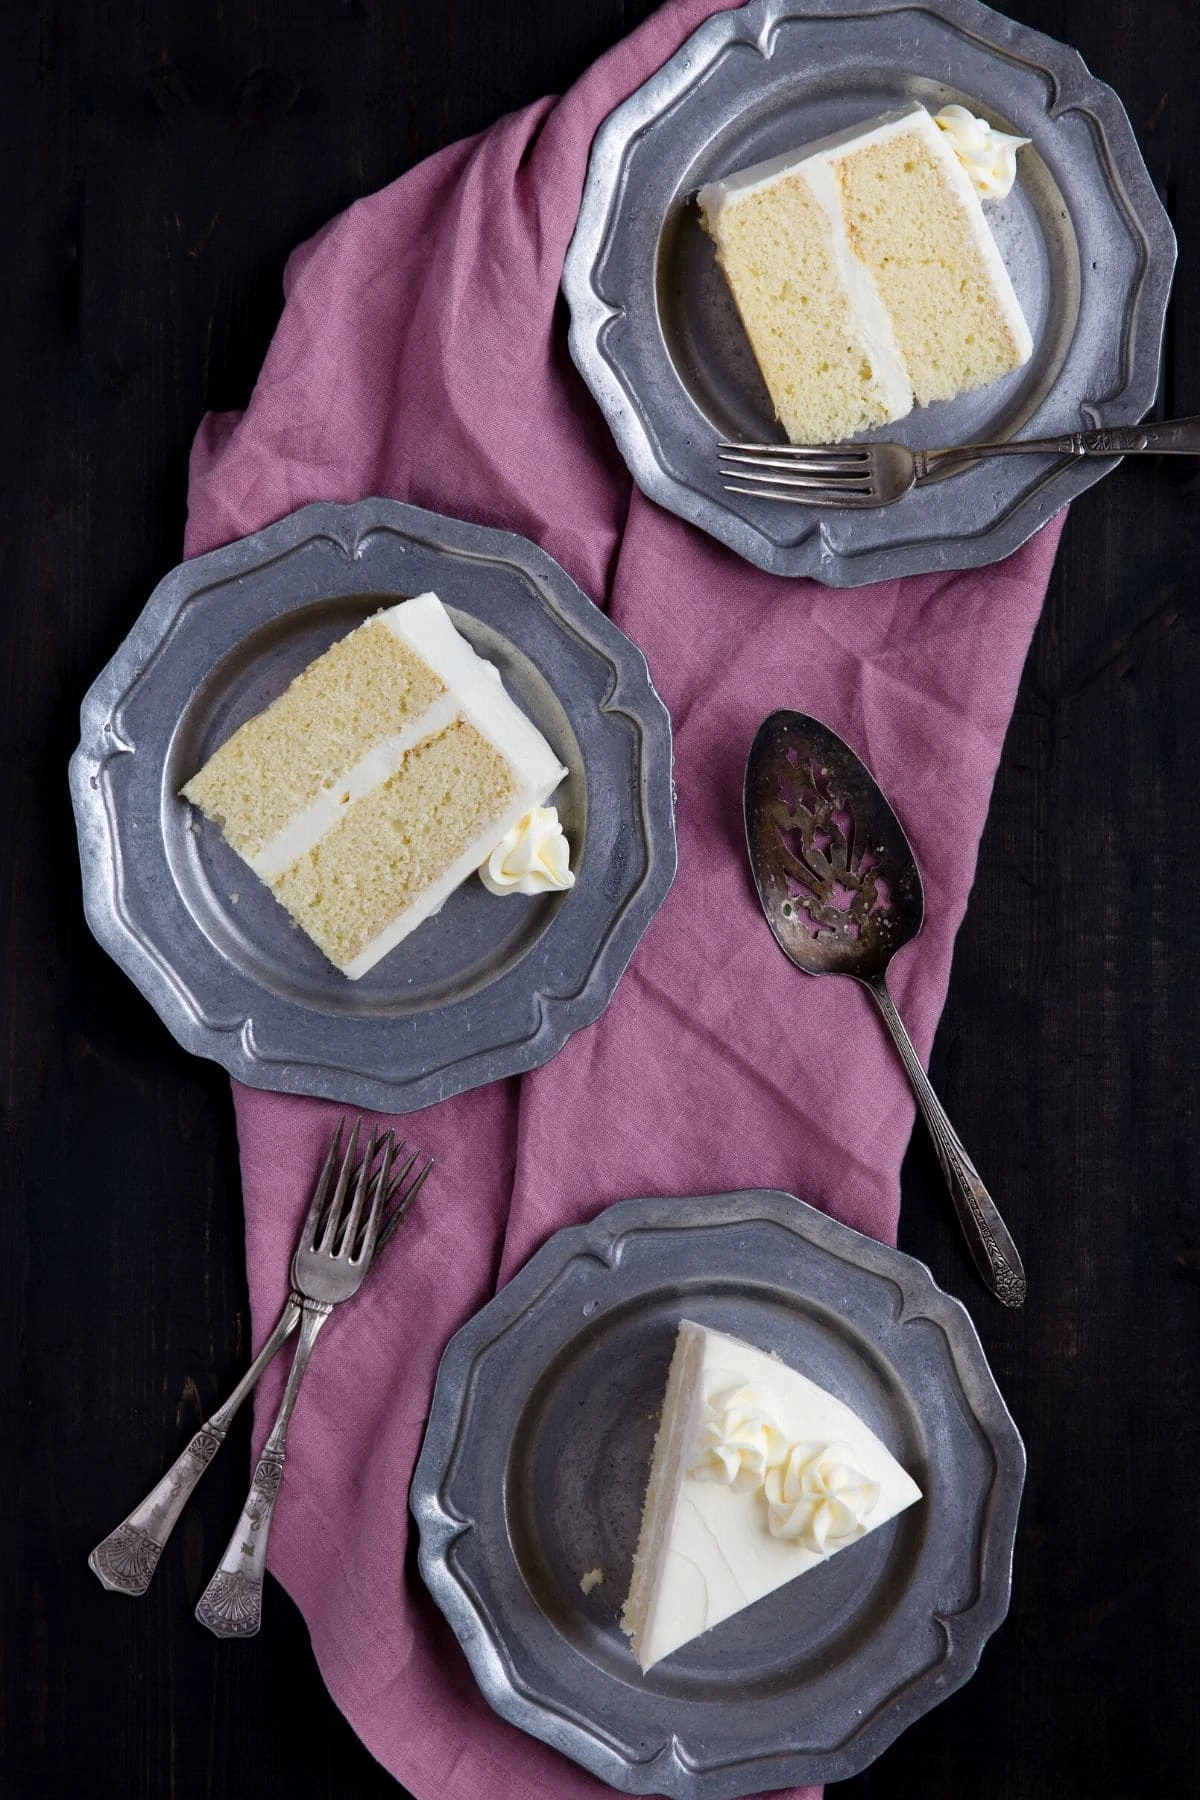 Three pewter plates with a slice of basic vanilla cake on each one.